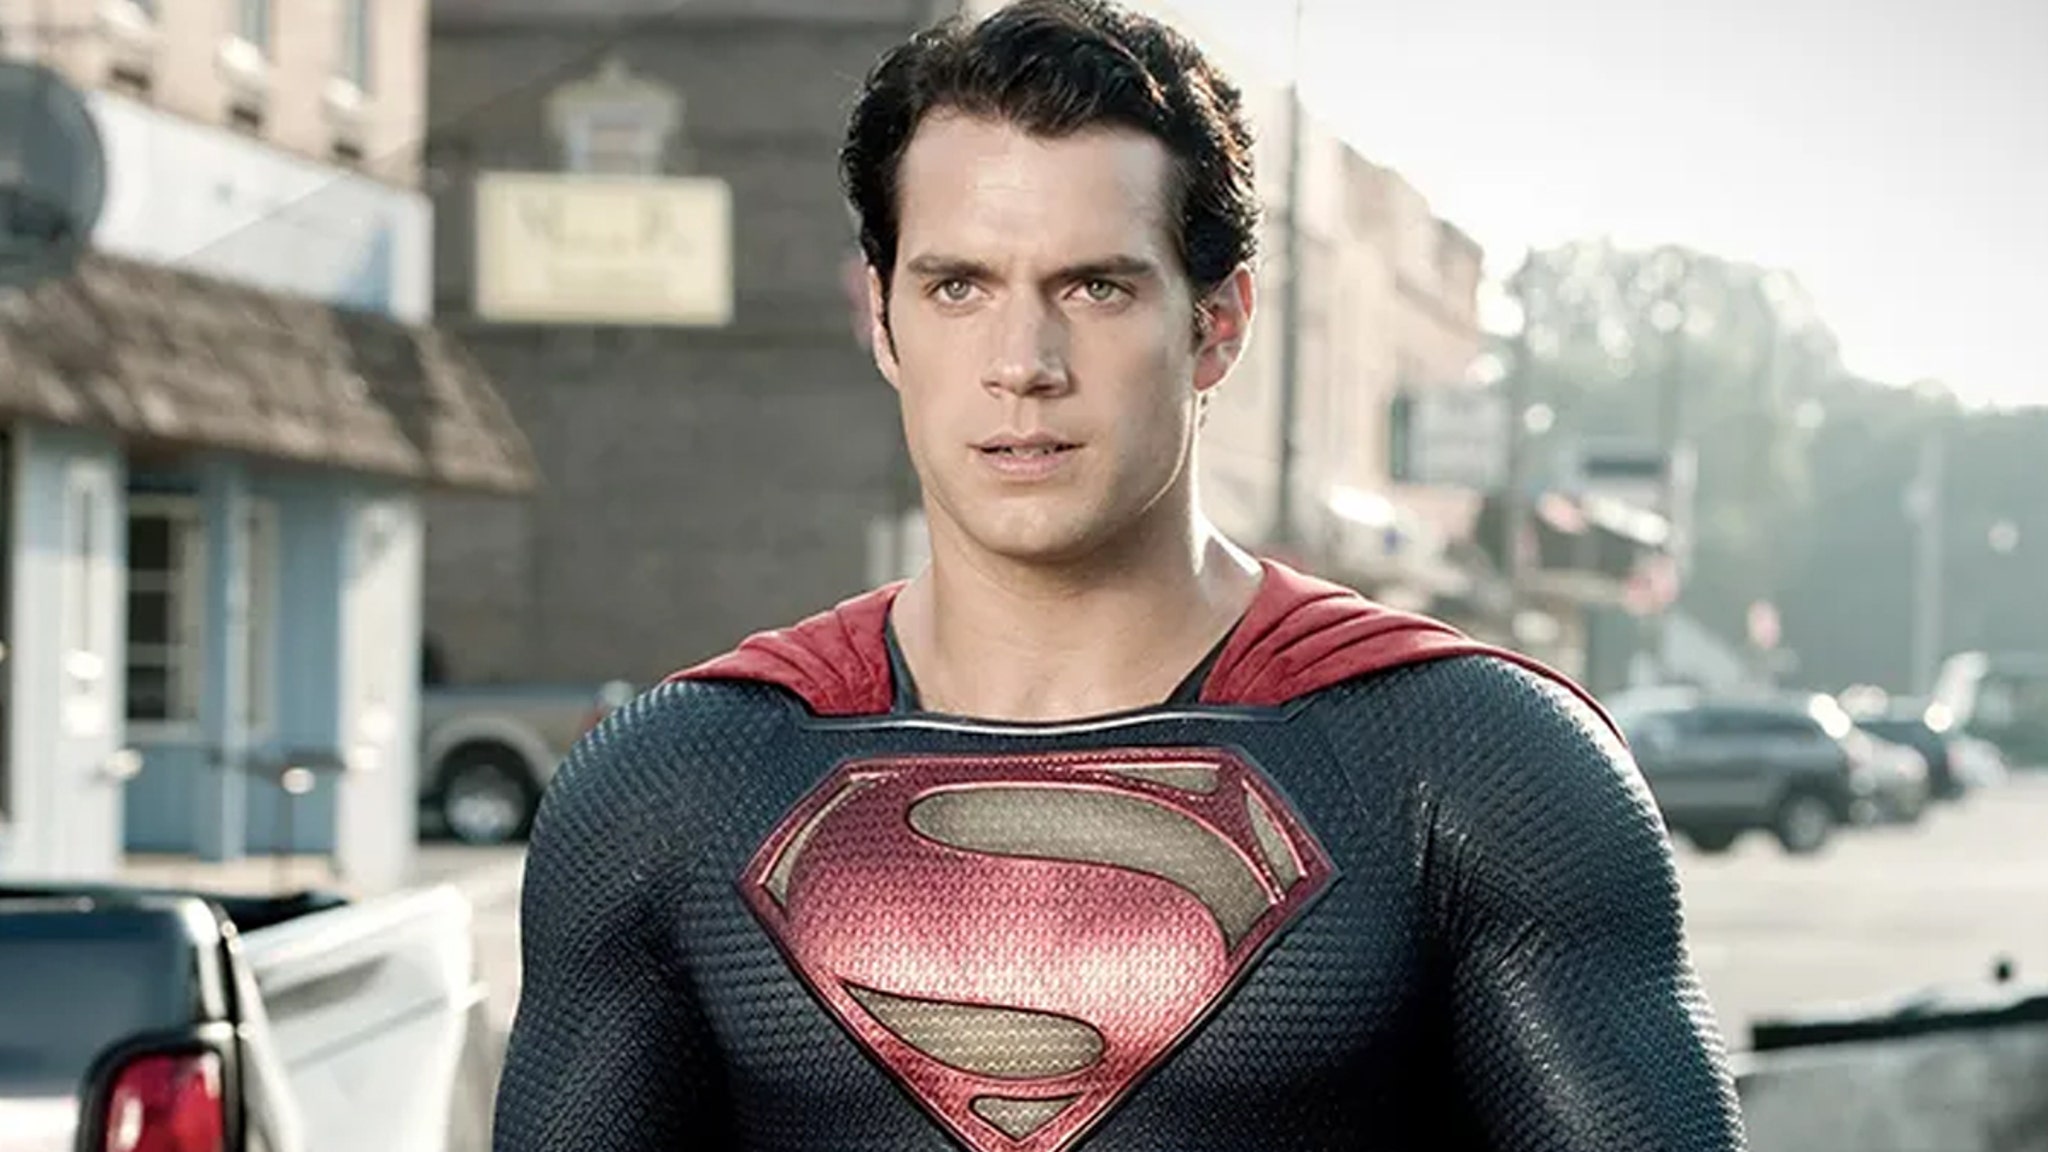 Who Is the New Superman After Henry Cavill? Clark Kent Is